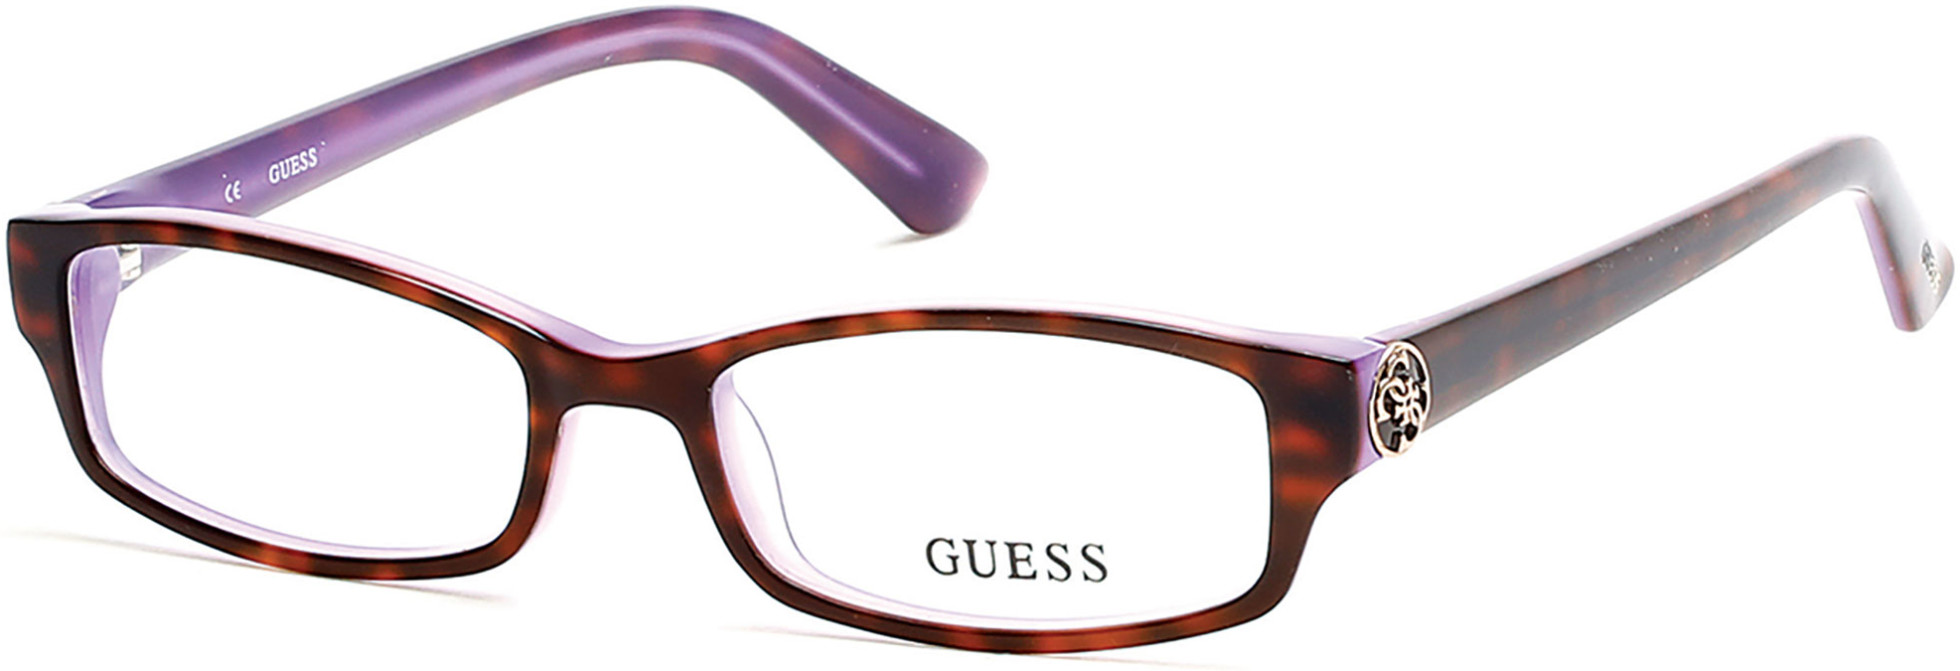 GUESS 2526 052